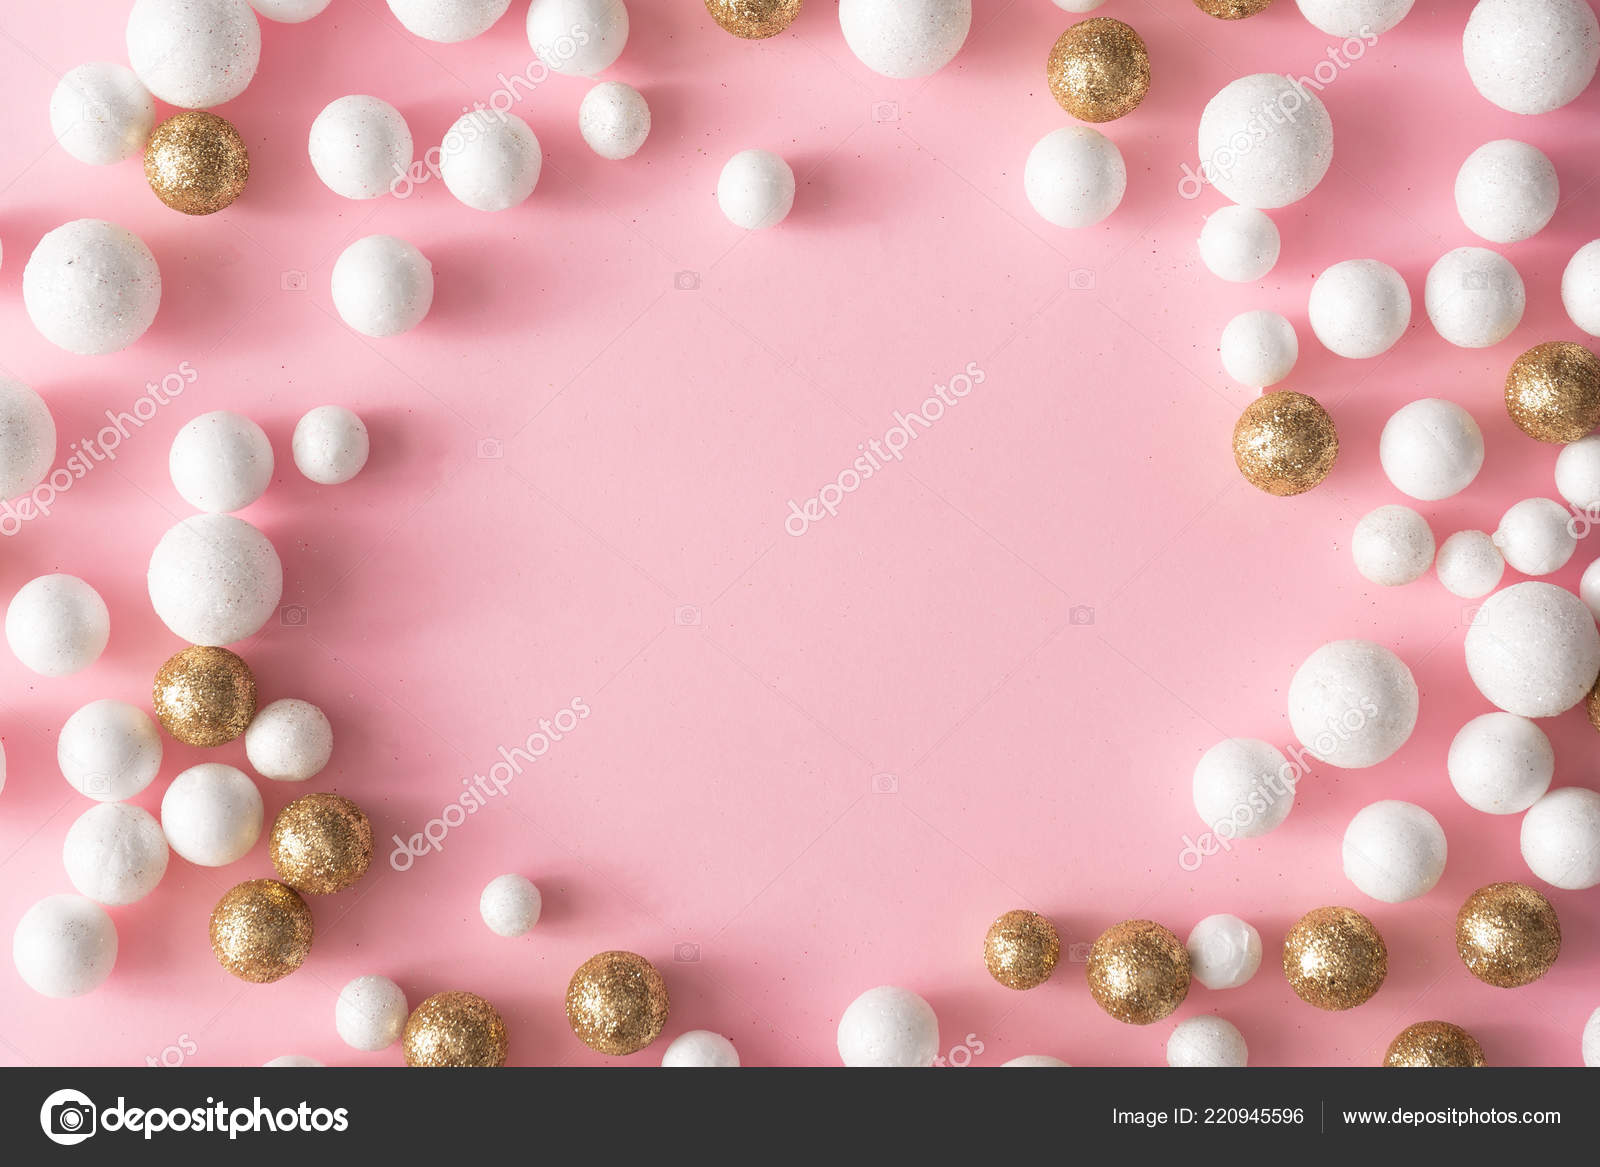 Download A Heart Made Of Gold Glitter On A Pink Background